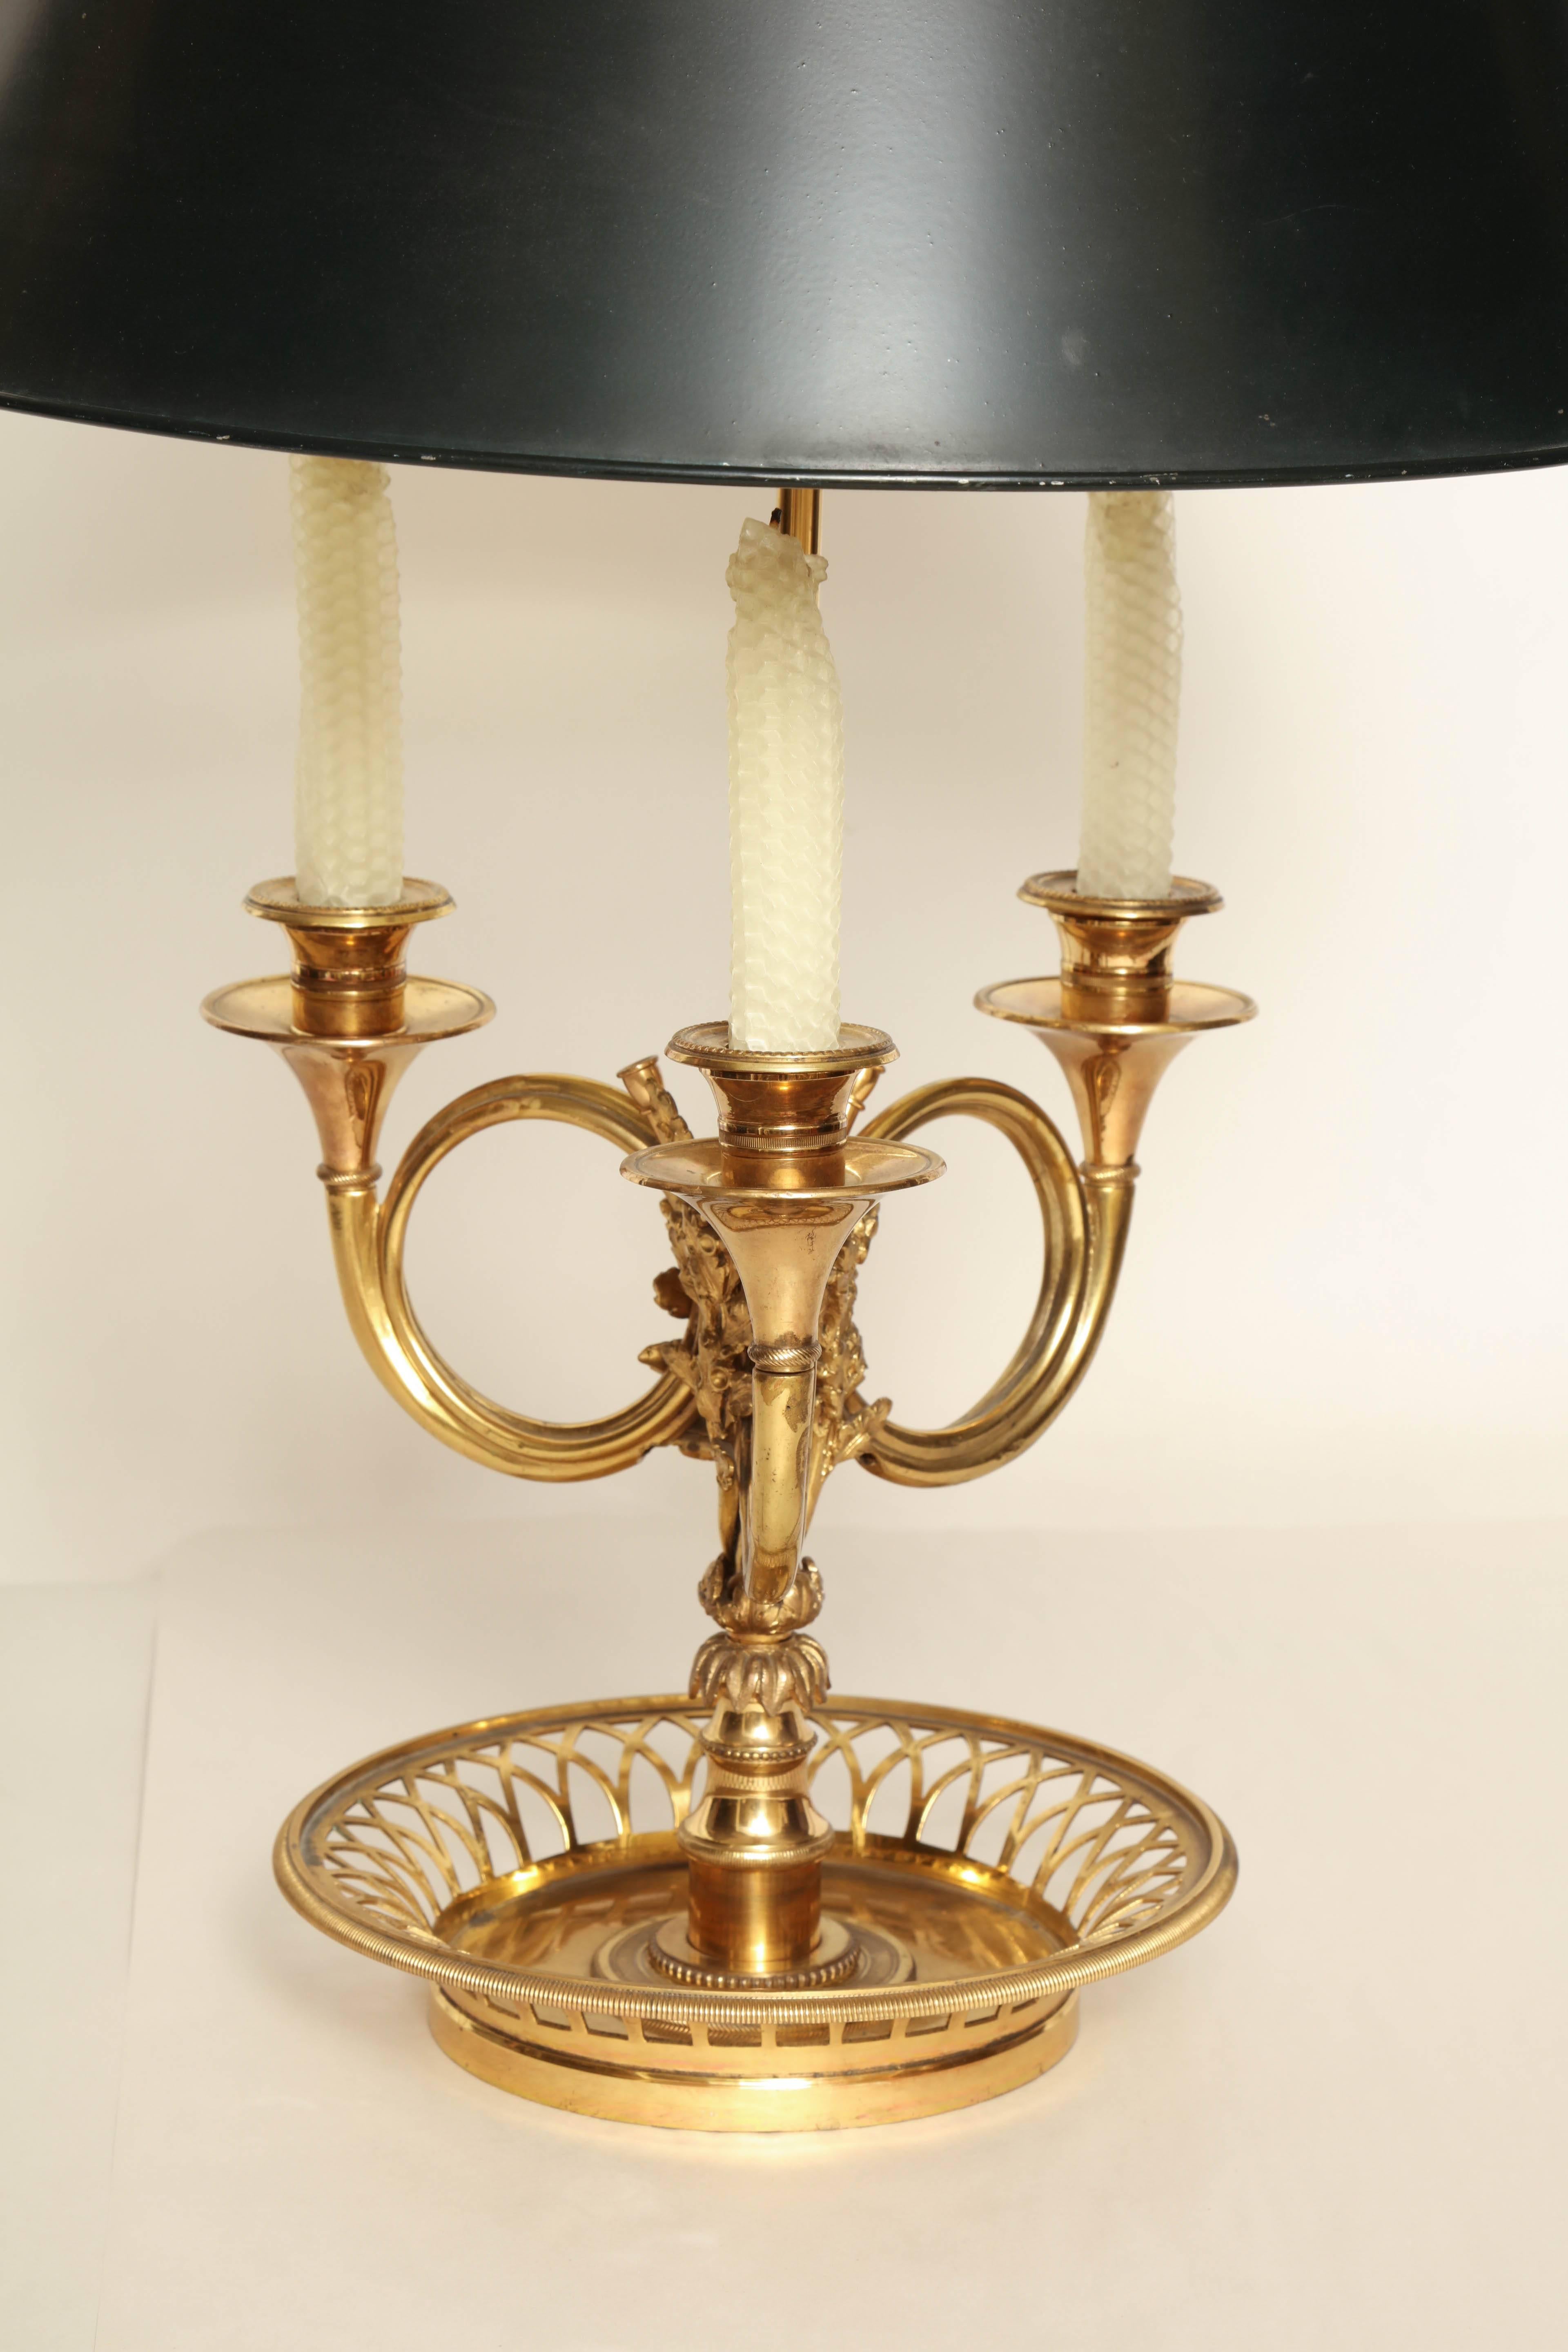 A French Louis XVI Style brass Bouillotte 2-light table lamp, with 3 candles each supported by a curled Horn-shaped arm, and emanating from a tiered stem issuing from a pierced stem base, and decorated with laurel leaves. Adjustable stem supports a